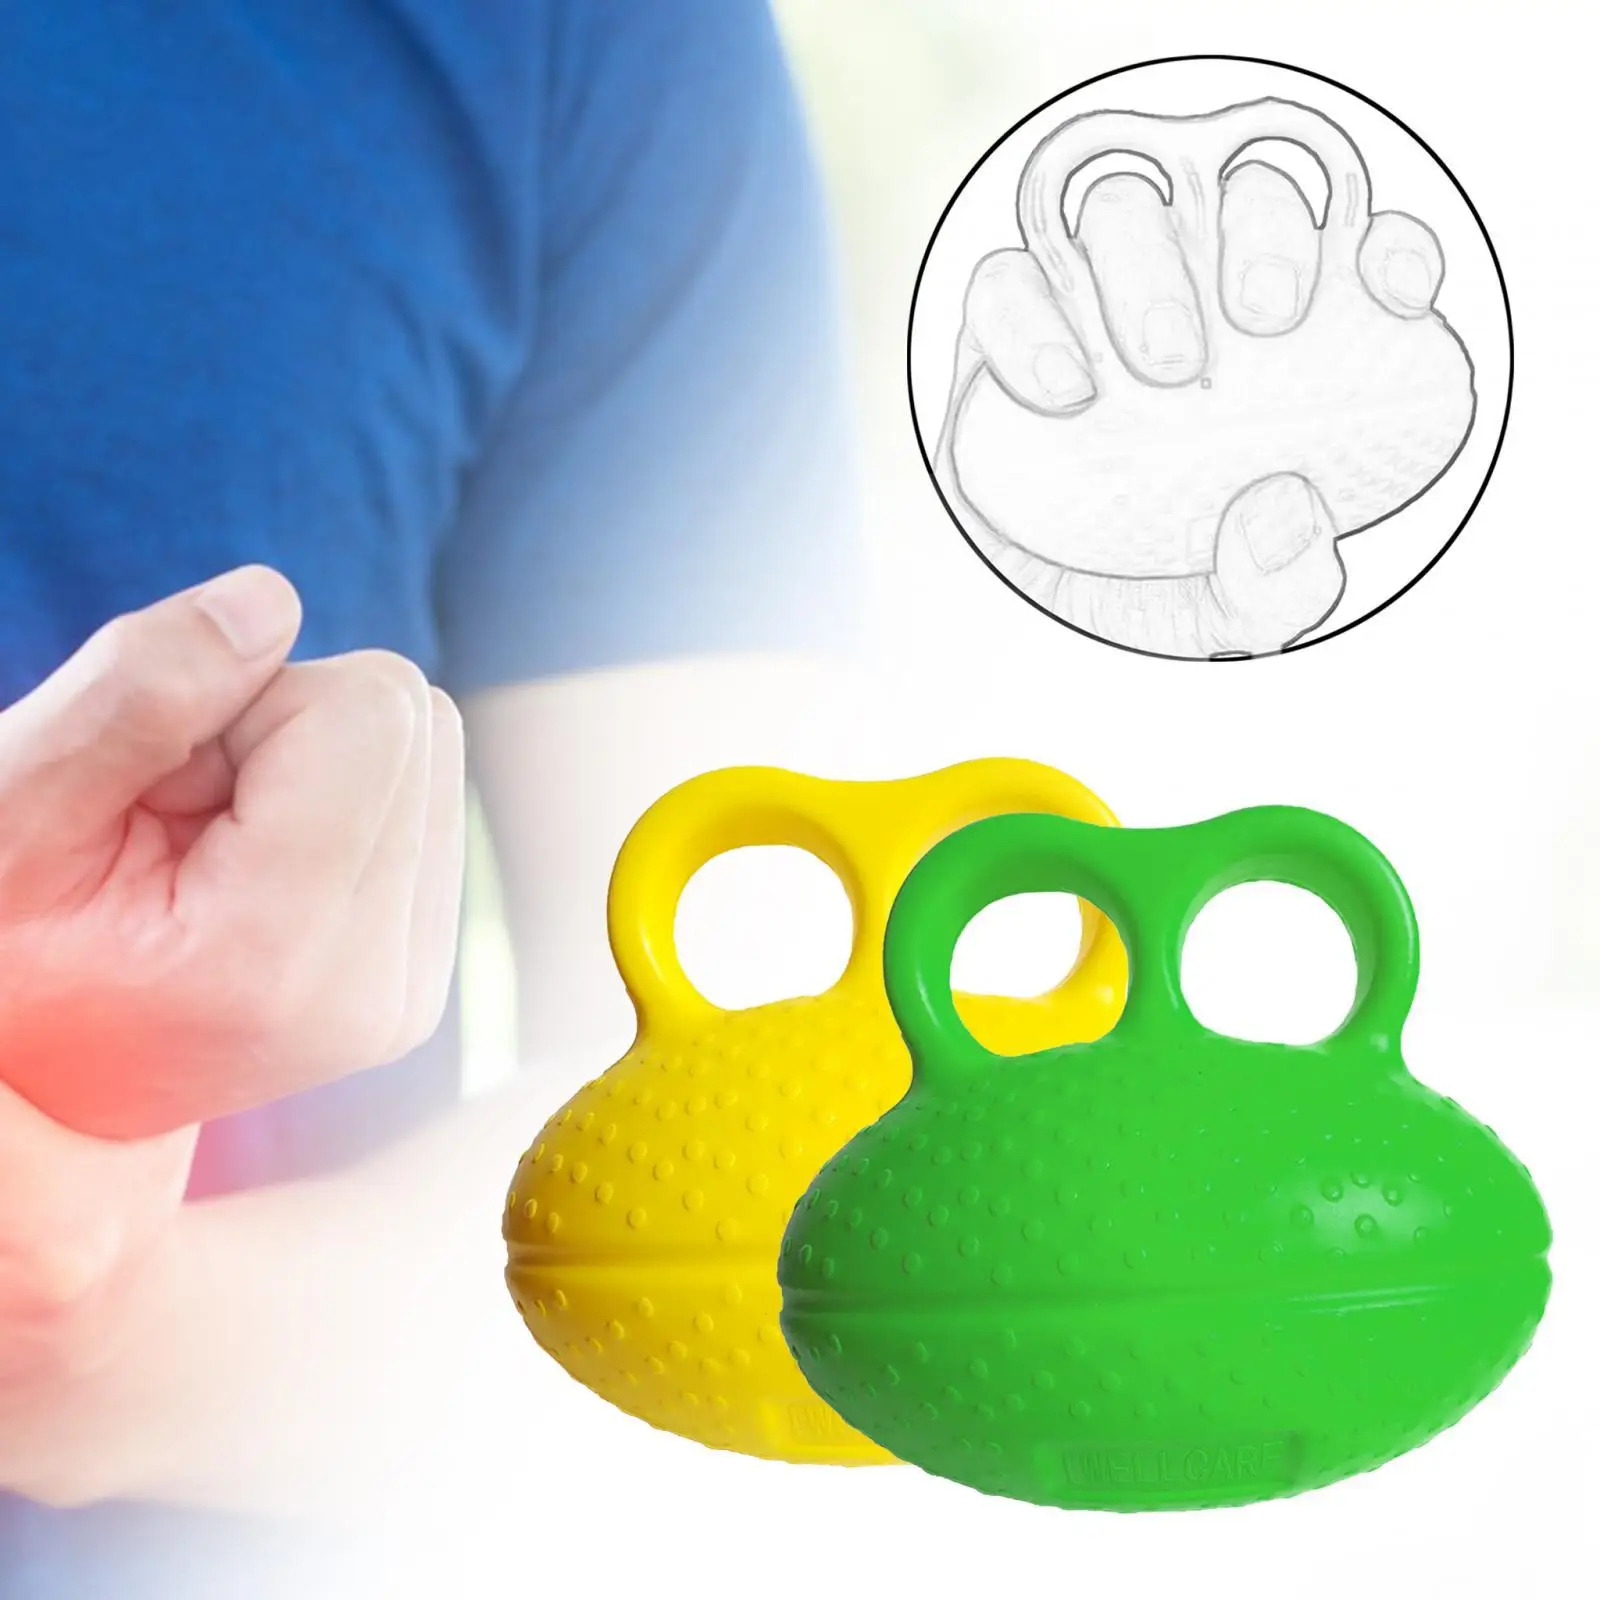 Grip Exercise Ball Portable Durable PU Soft Finger Extension Exerciser for Adults Grip Strength Training Musicians Arthritis